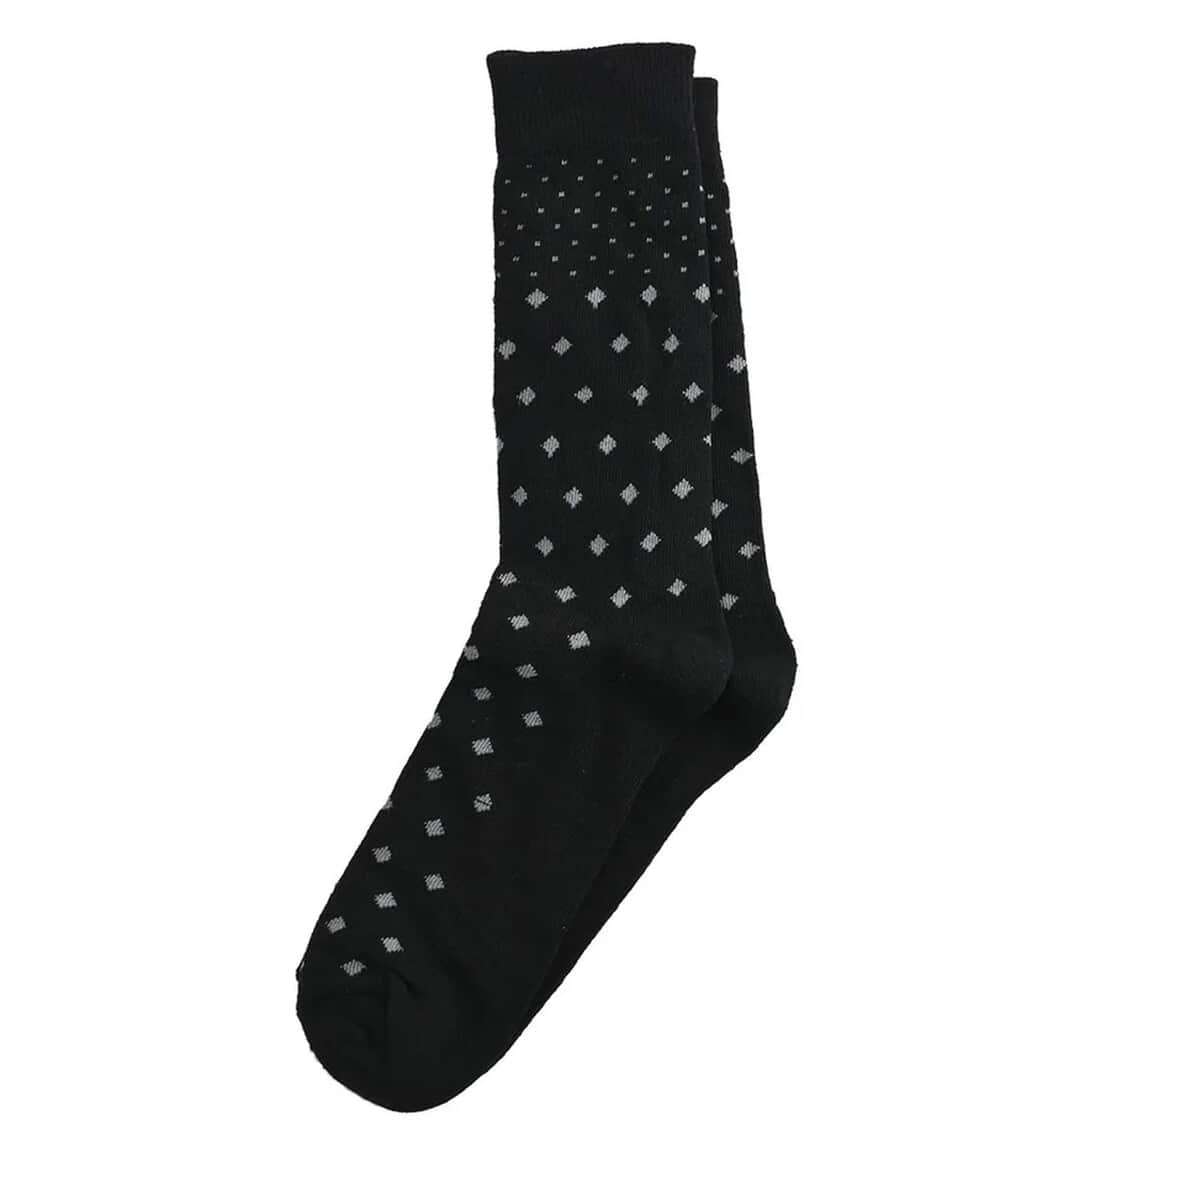 Marco Cavelli Black and Gray Set of 3 Men's Dress Socks, Breathable and Soft Socks for Men, Polyester and Cotton Socks, image number 2